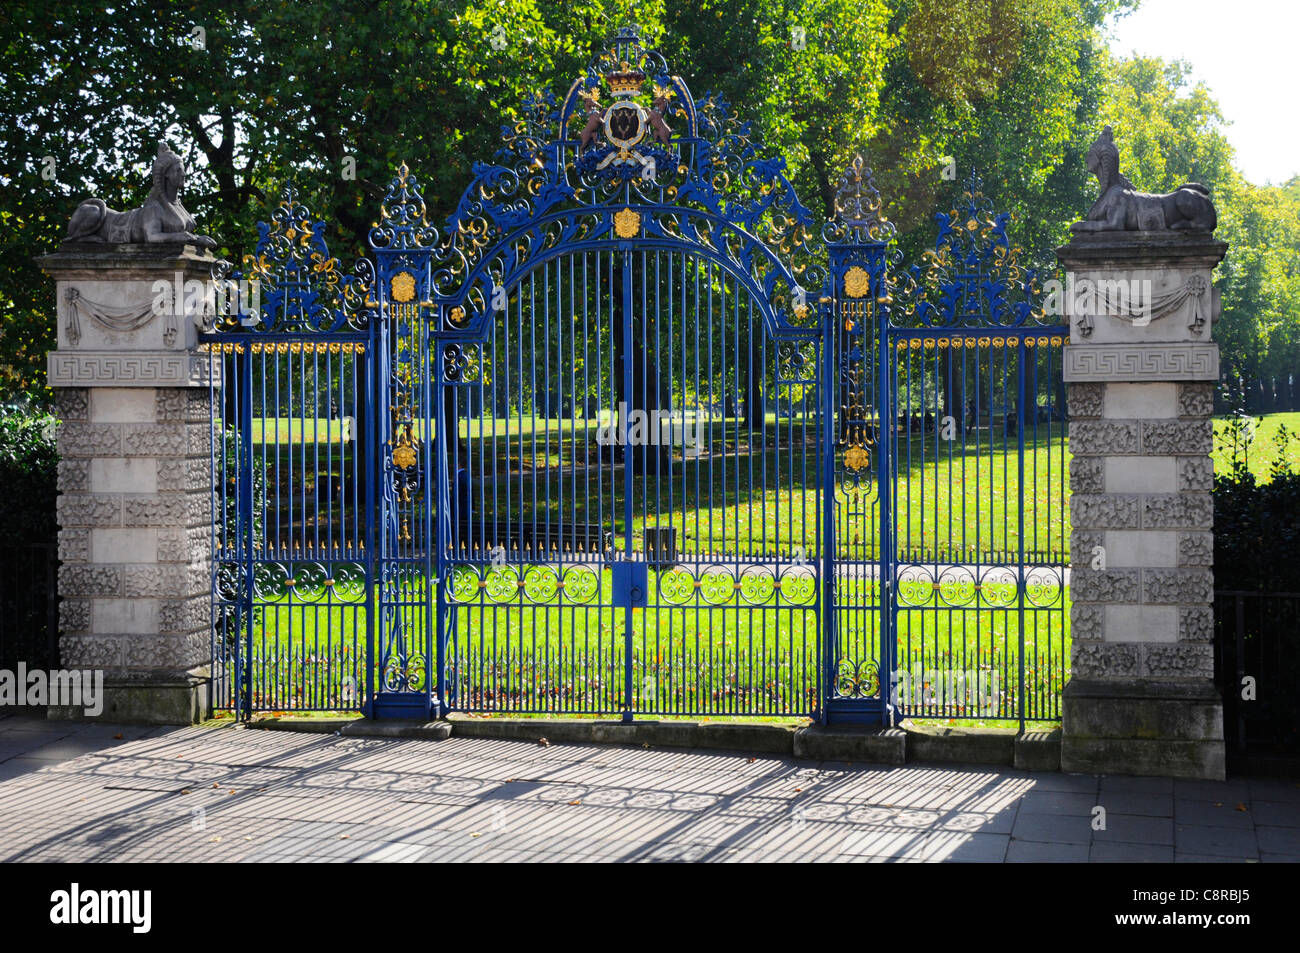 Steel ornamental gates seen from Piccadilly looking into London Royal Park Green Park London England UK Stock Photo